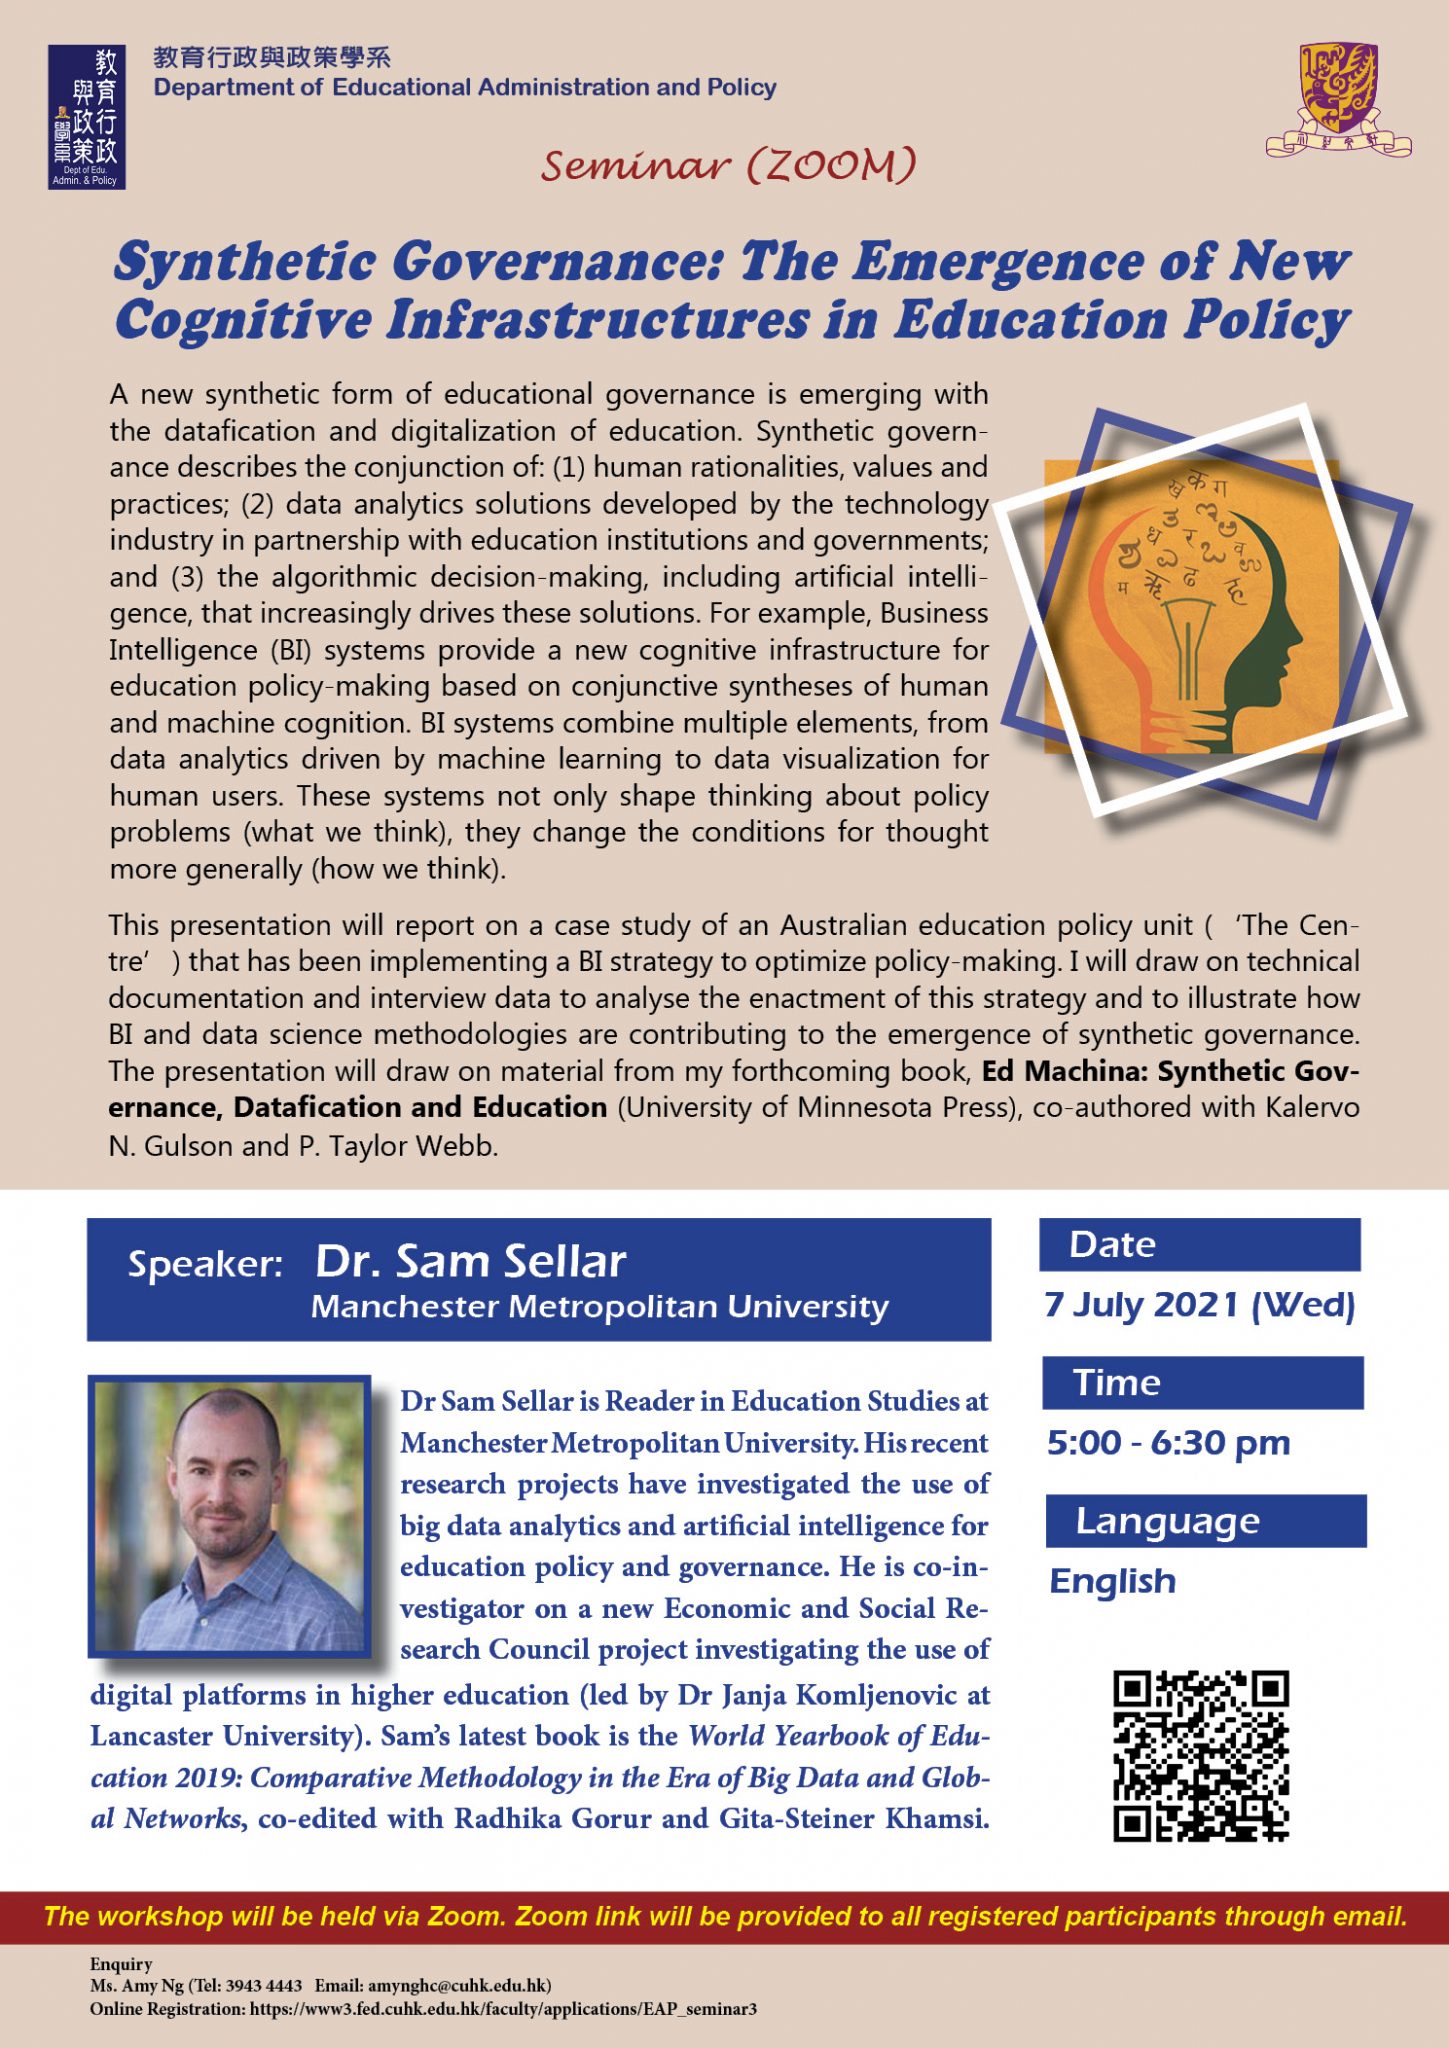 Synthetic Governance: The Emergence of New Cognitive Infrastructures in Education Policy